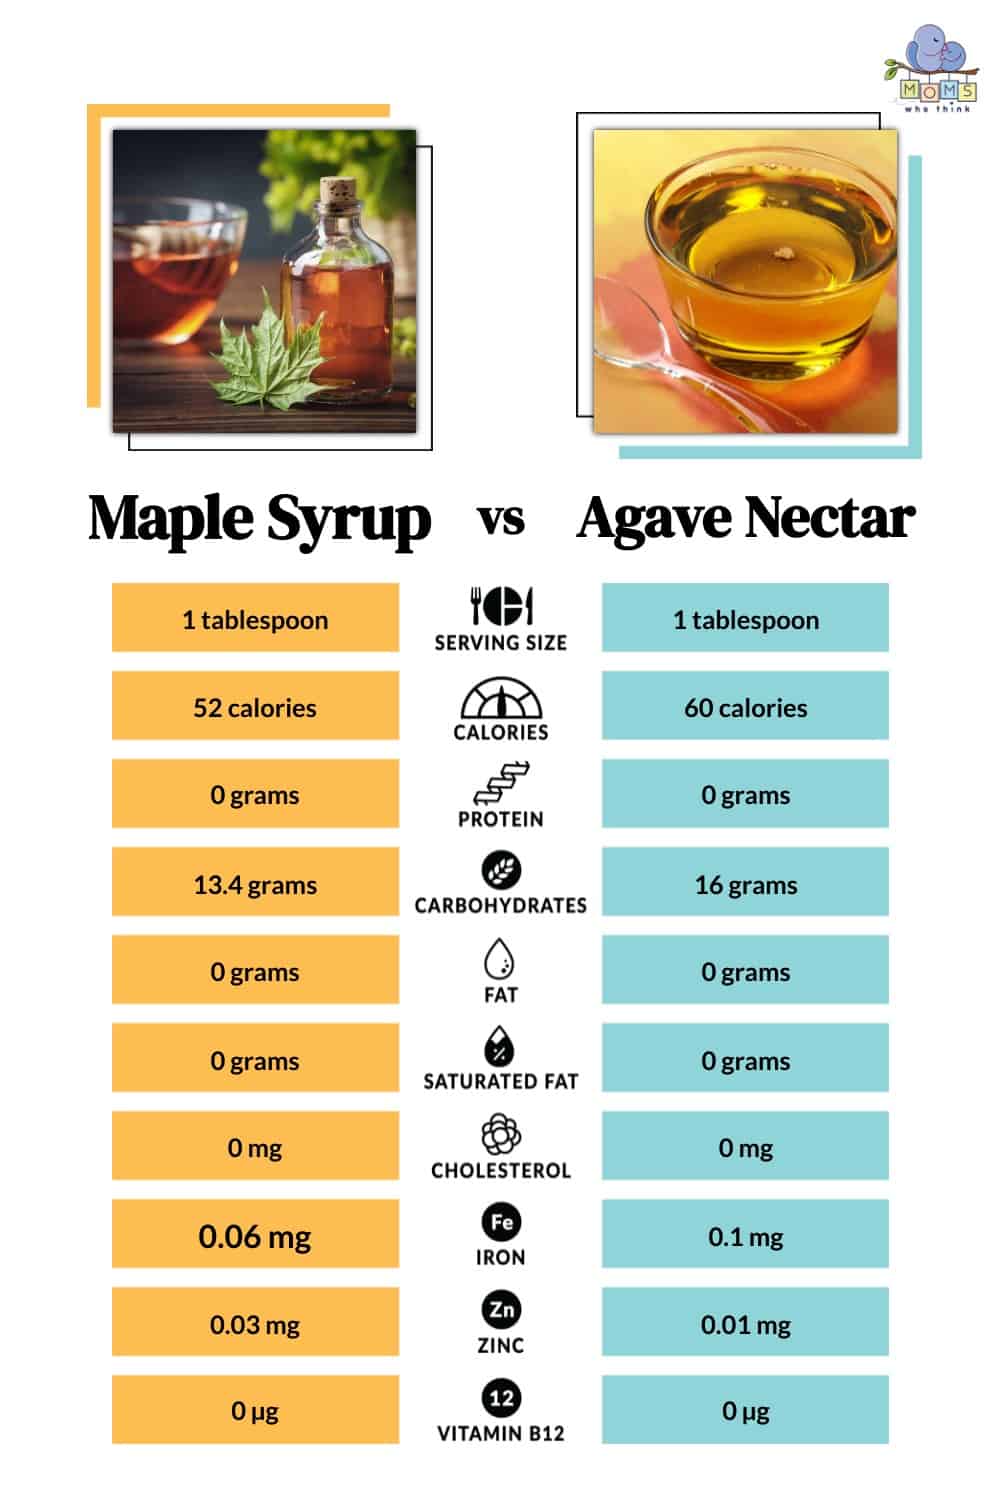 Maple Syrup vs Agave Nectar Nutritional Facts